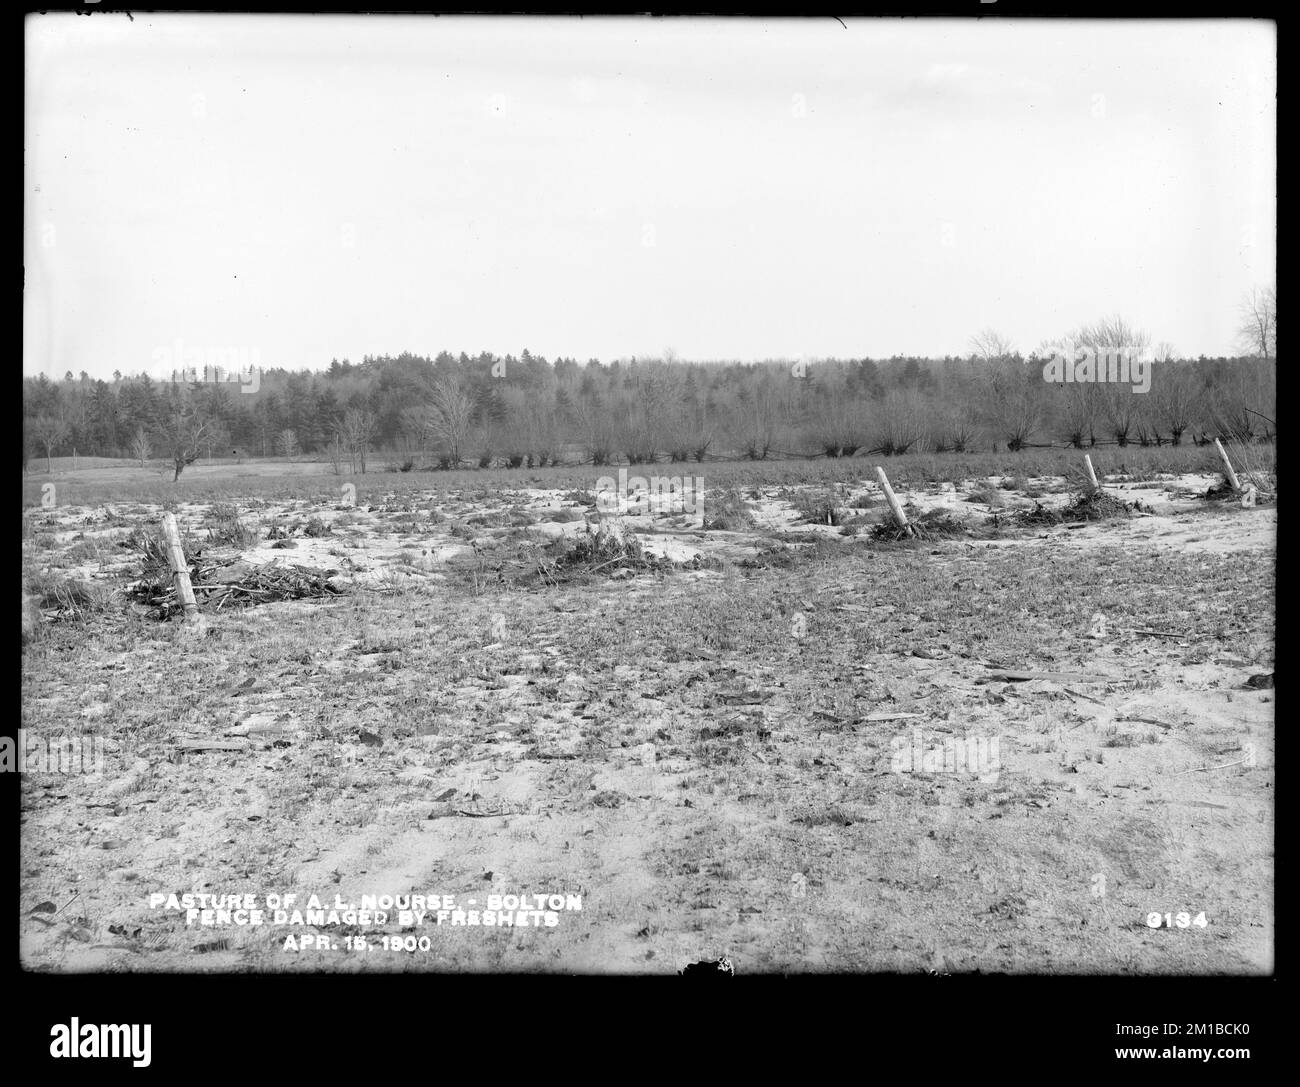 Wachusett Reservoir, A. L. Nourse's pasture, fence damaged by freshets, Bolton, Mass., Apr. 15, 1900 , waterworks, reservoirs water distribution structures, watershed sanitary improvement Stock Photo